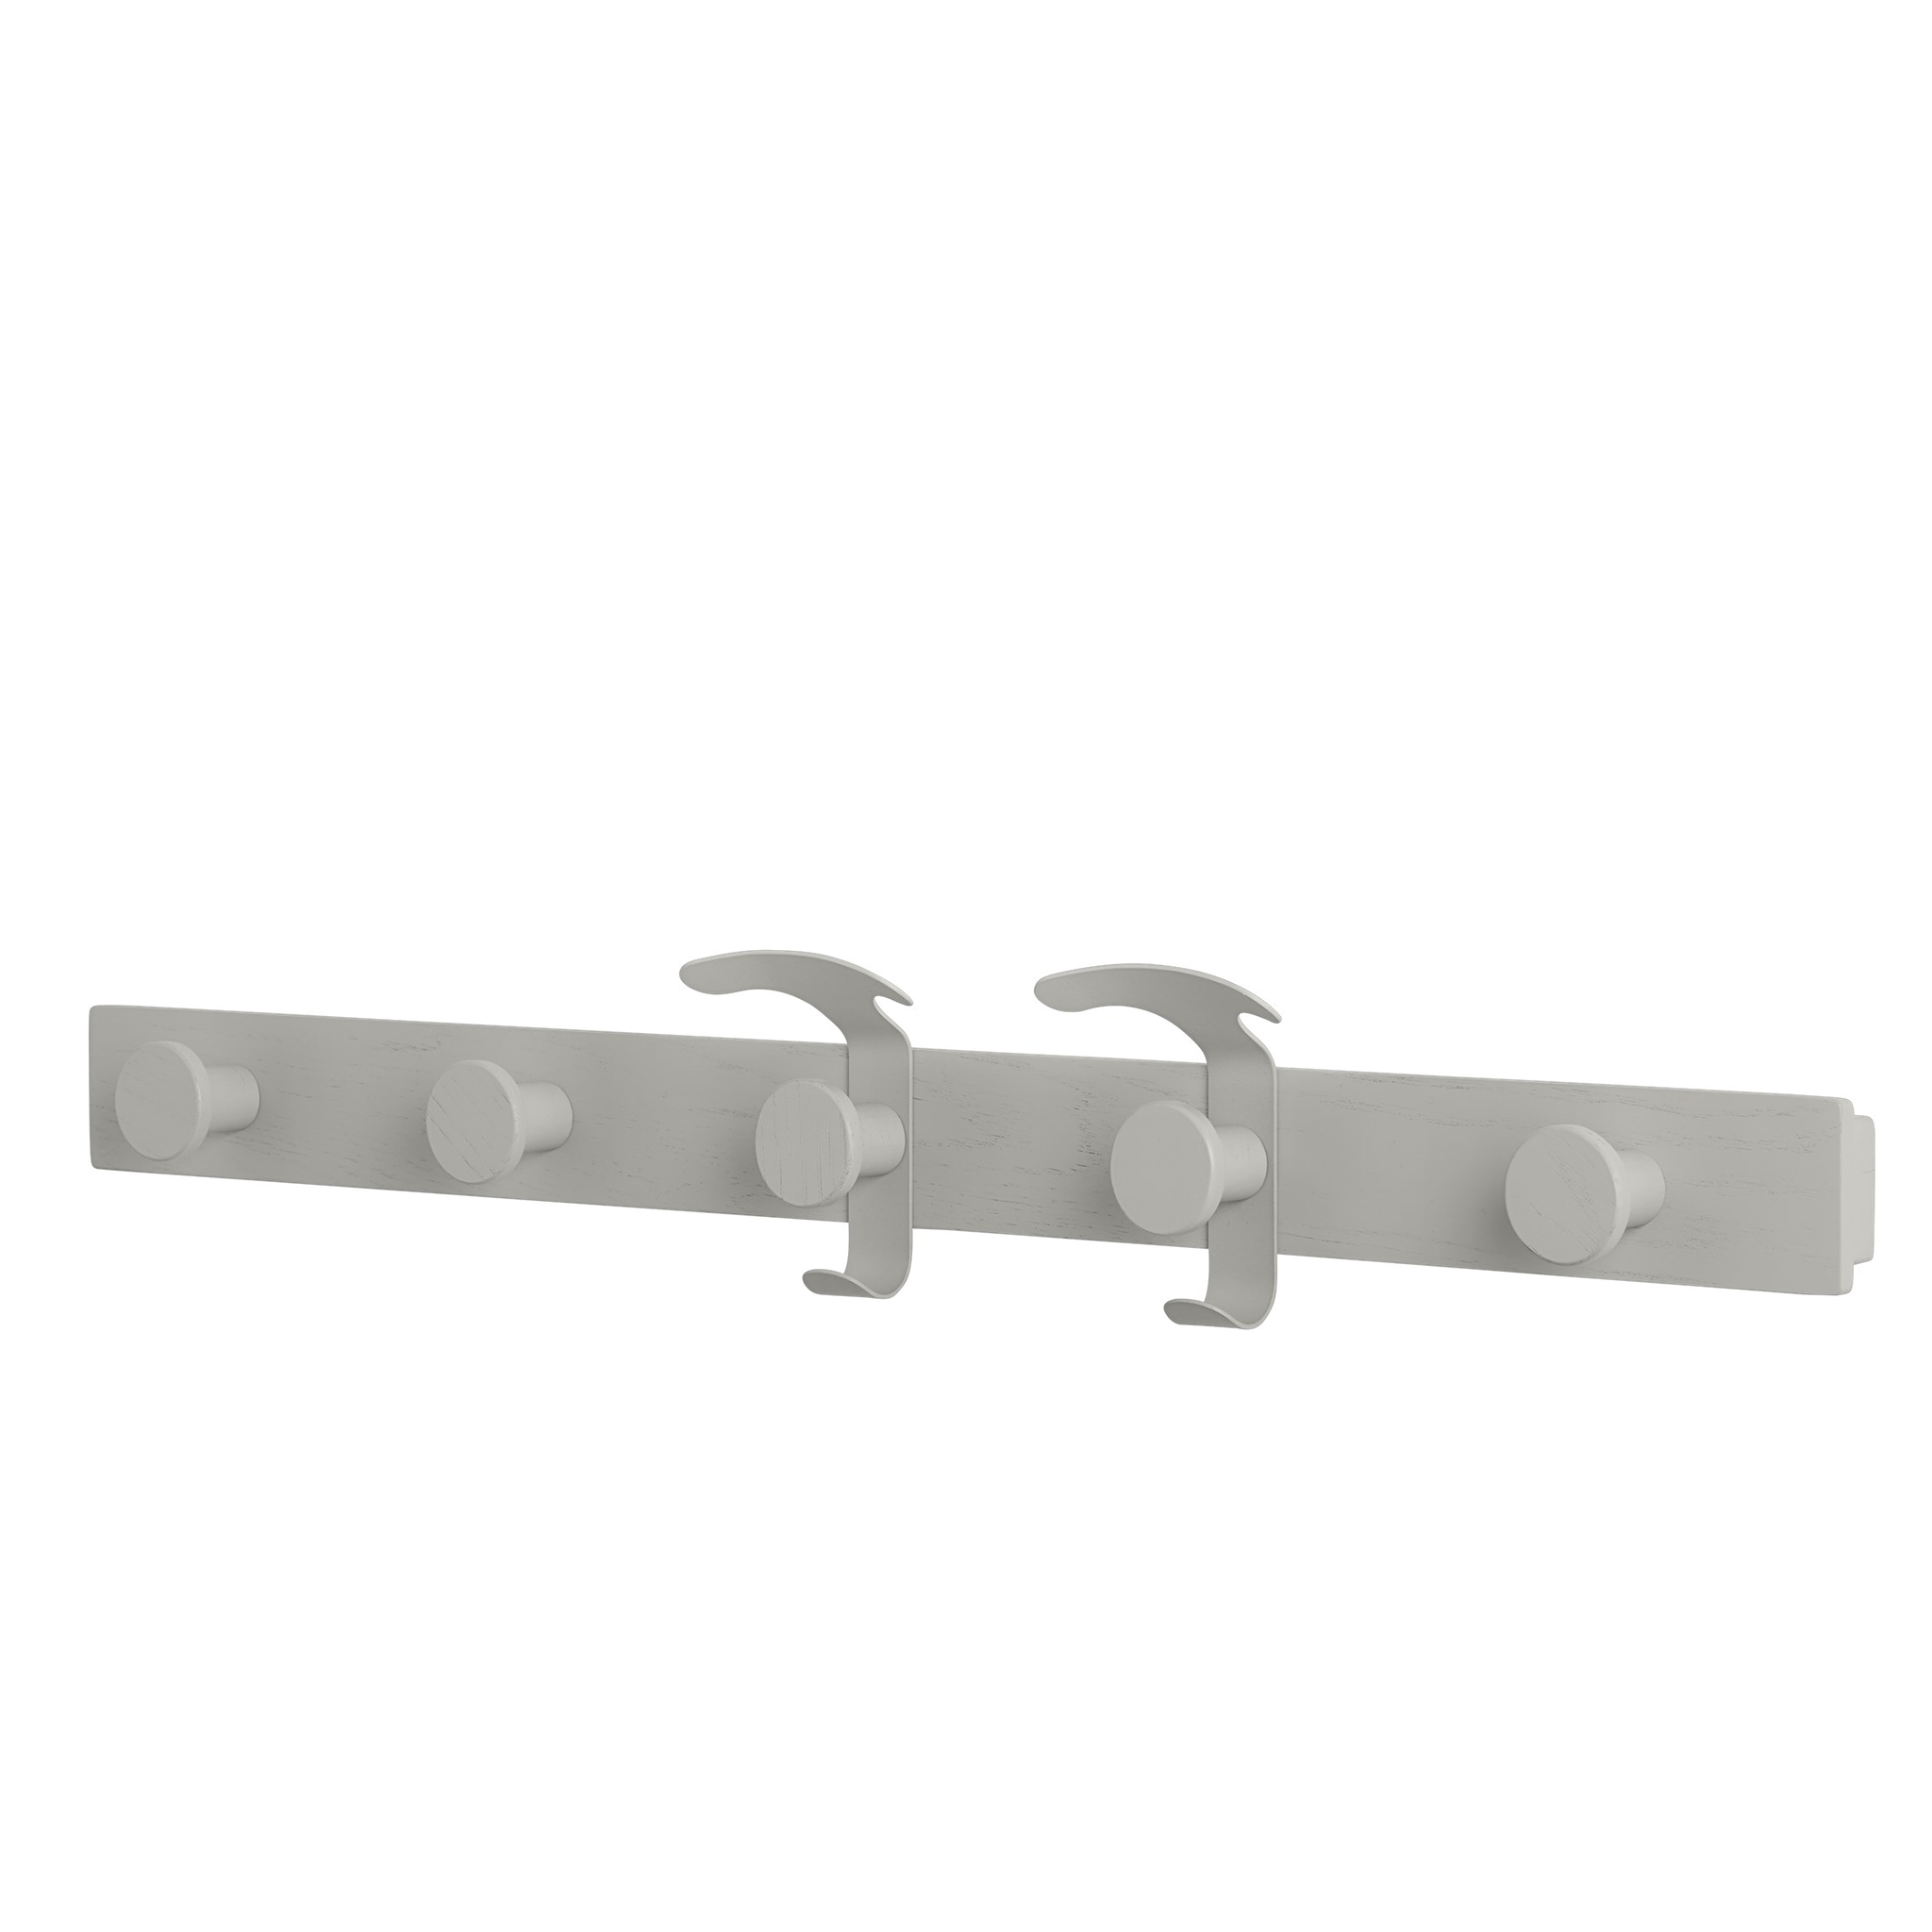 Avail Coat Rack by Sam Hect & Kim Collin for Muuto